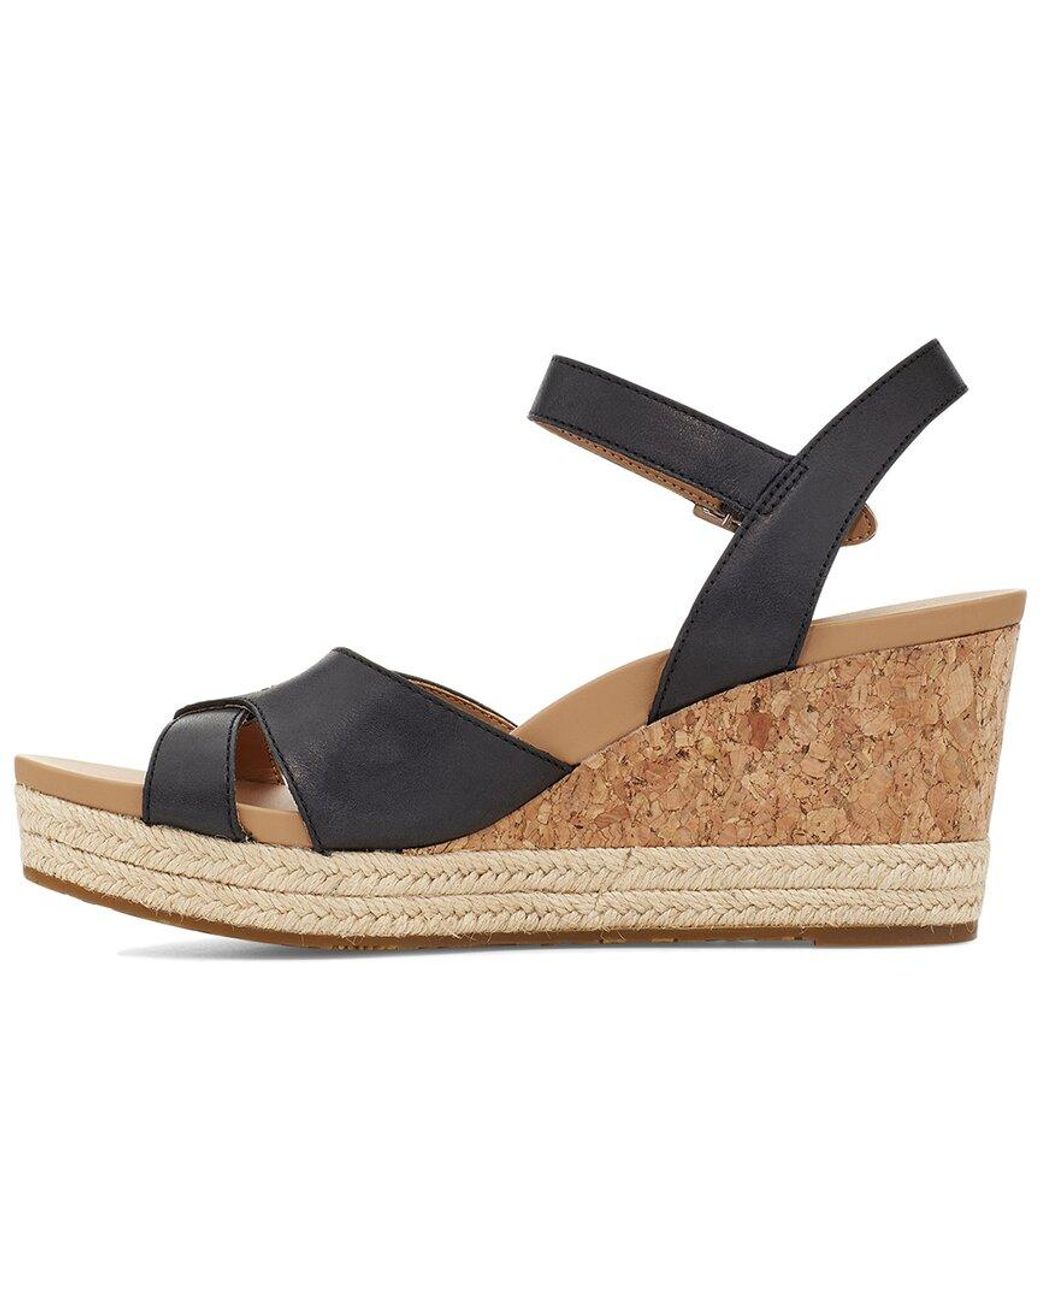 UGG Cloverdale Leather Wedge Sandal in Black | Lyst Canada